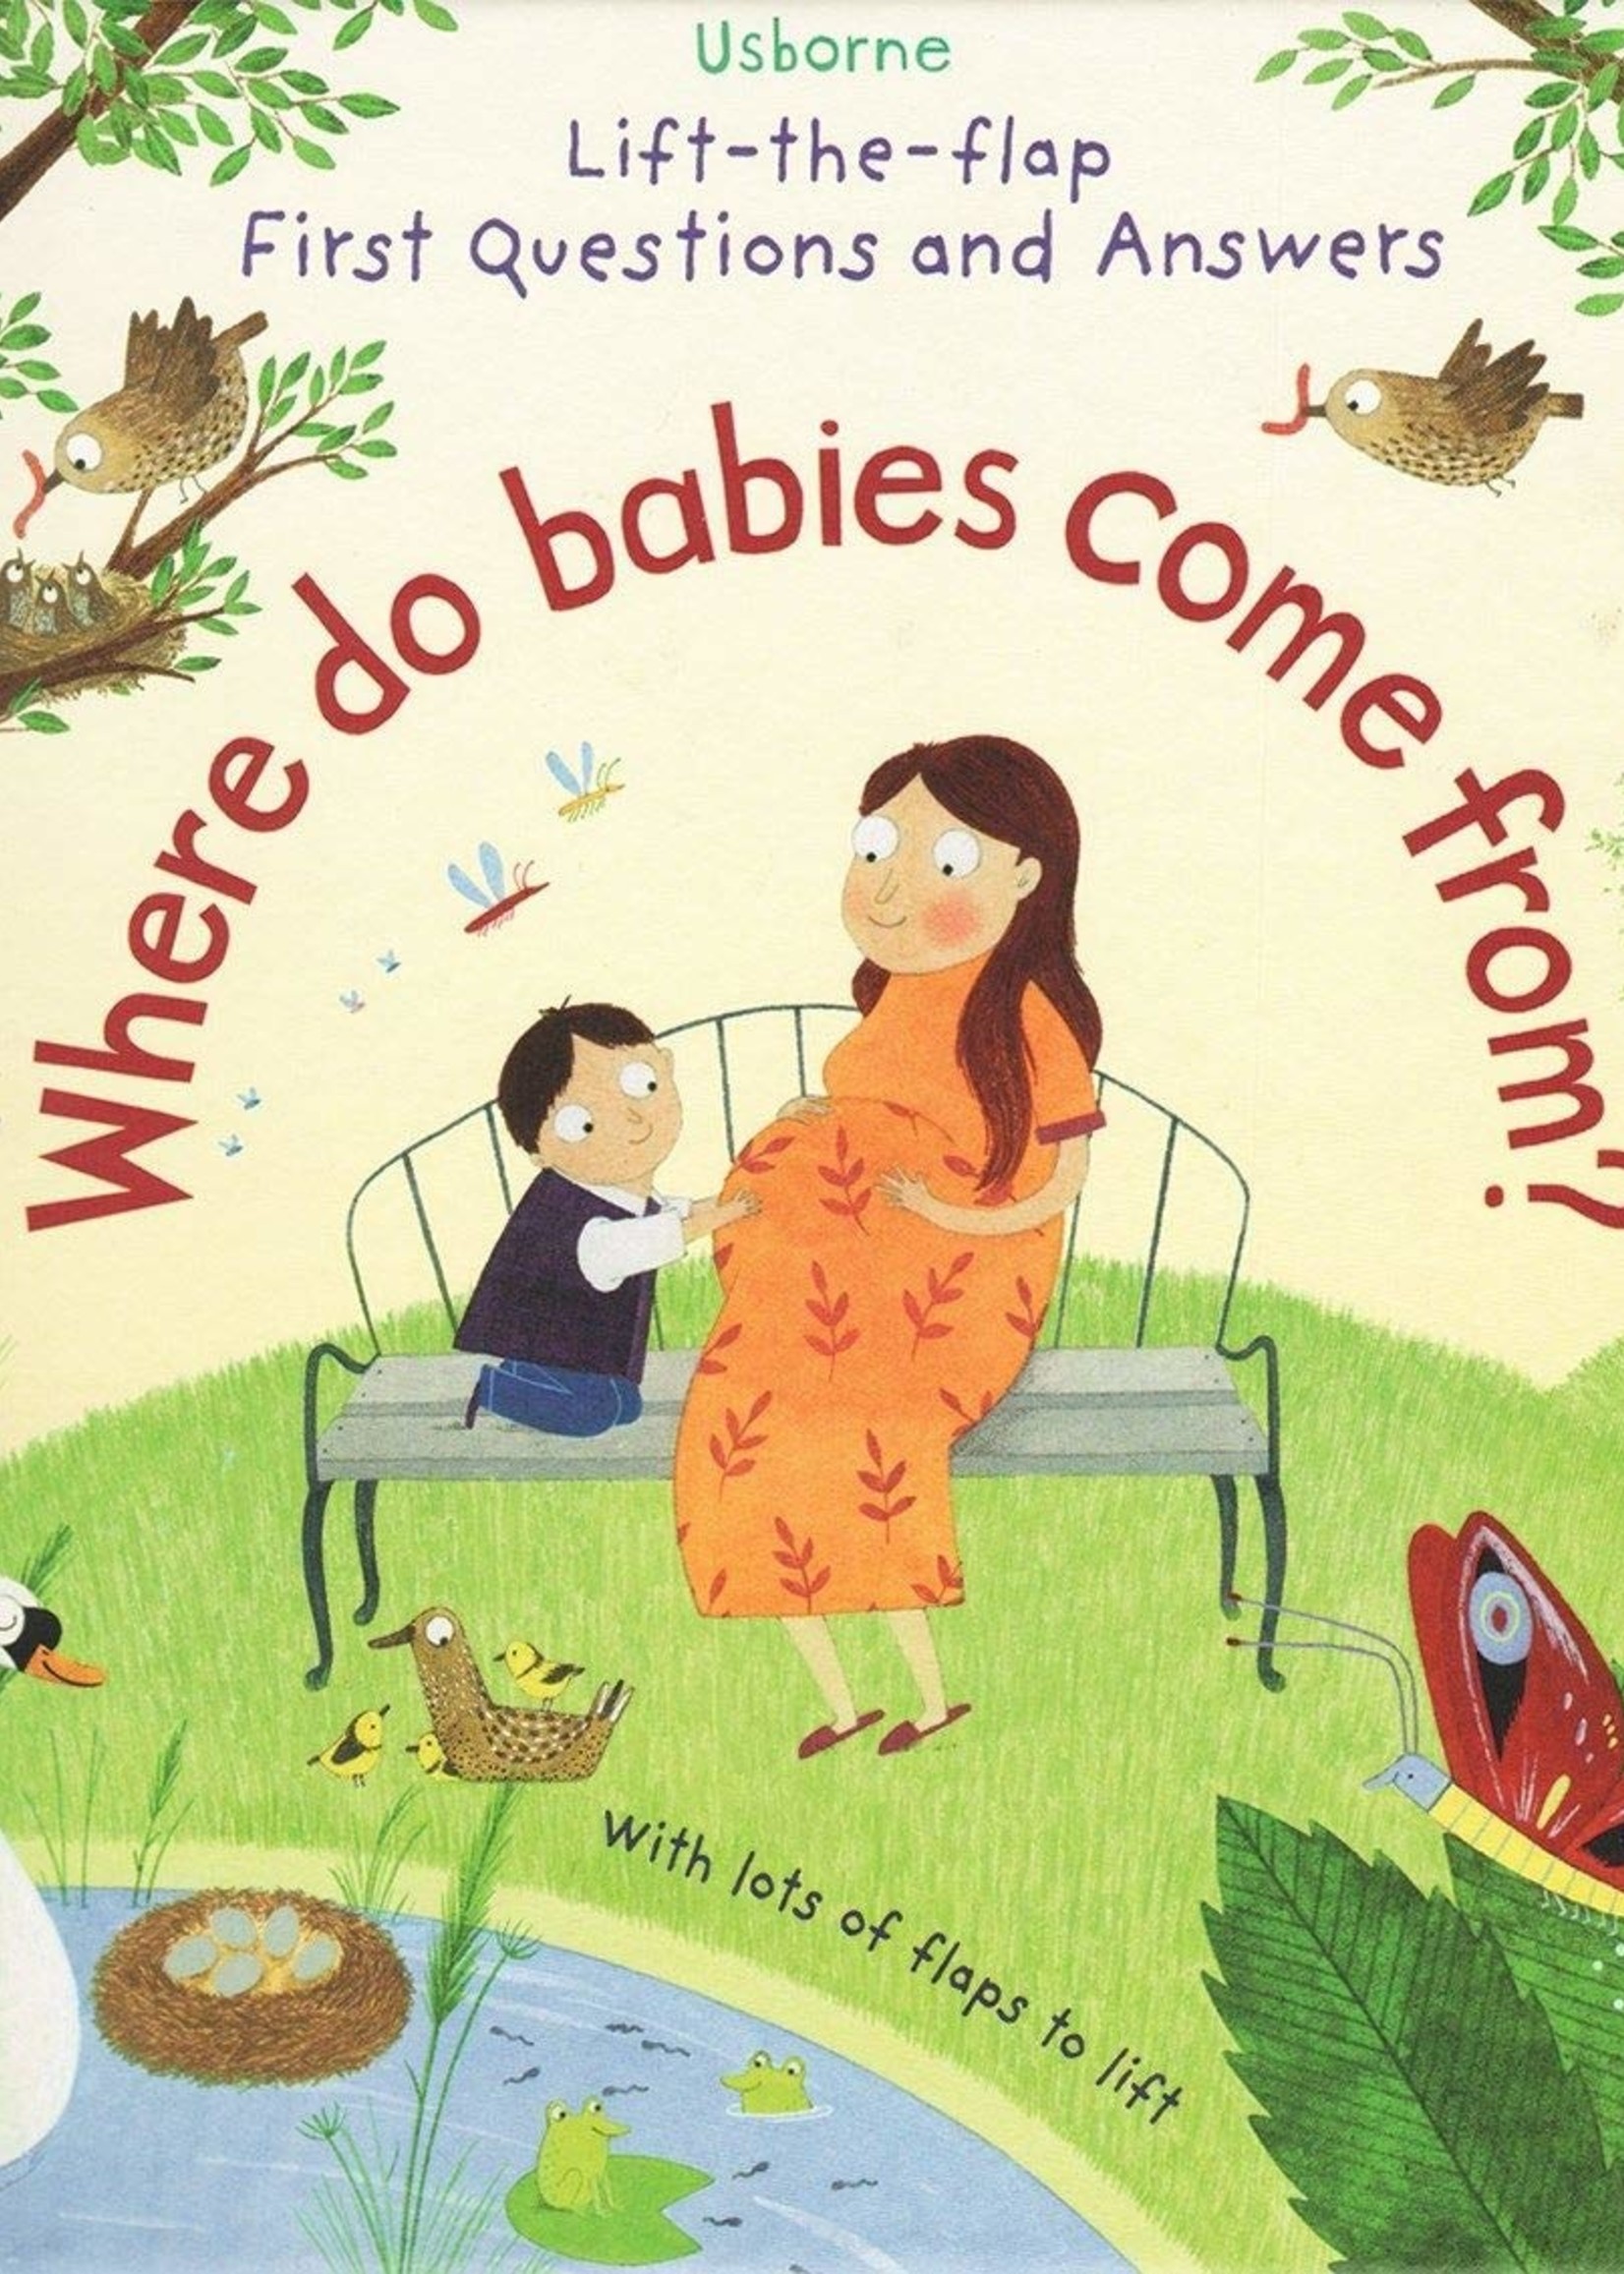 Usborne Where Do Babies Come From? Lift-the-flap - Board Book